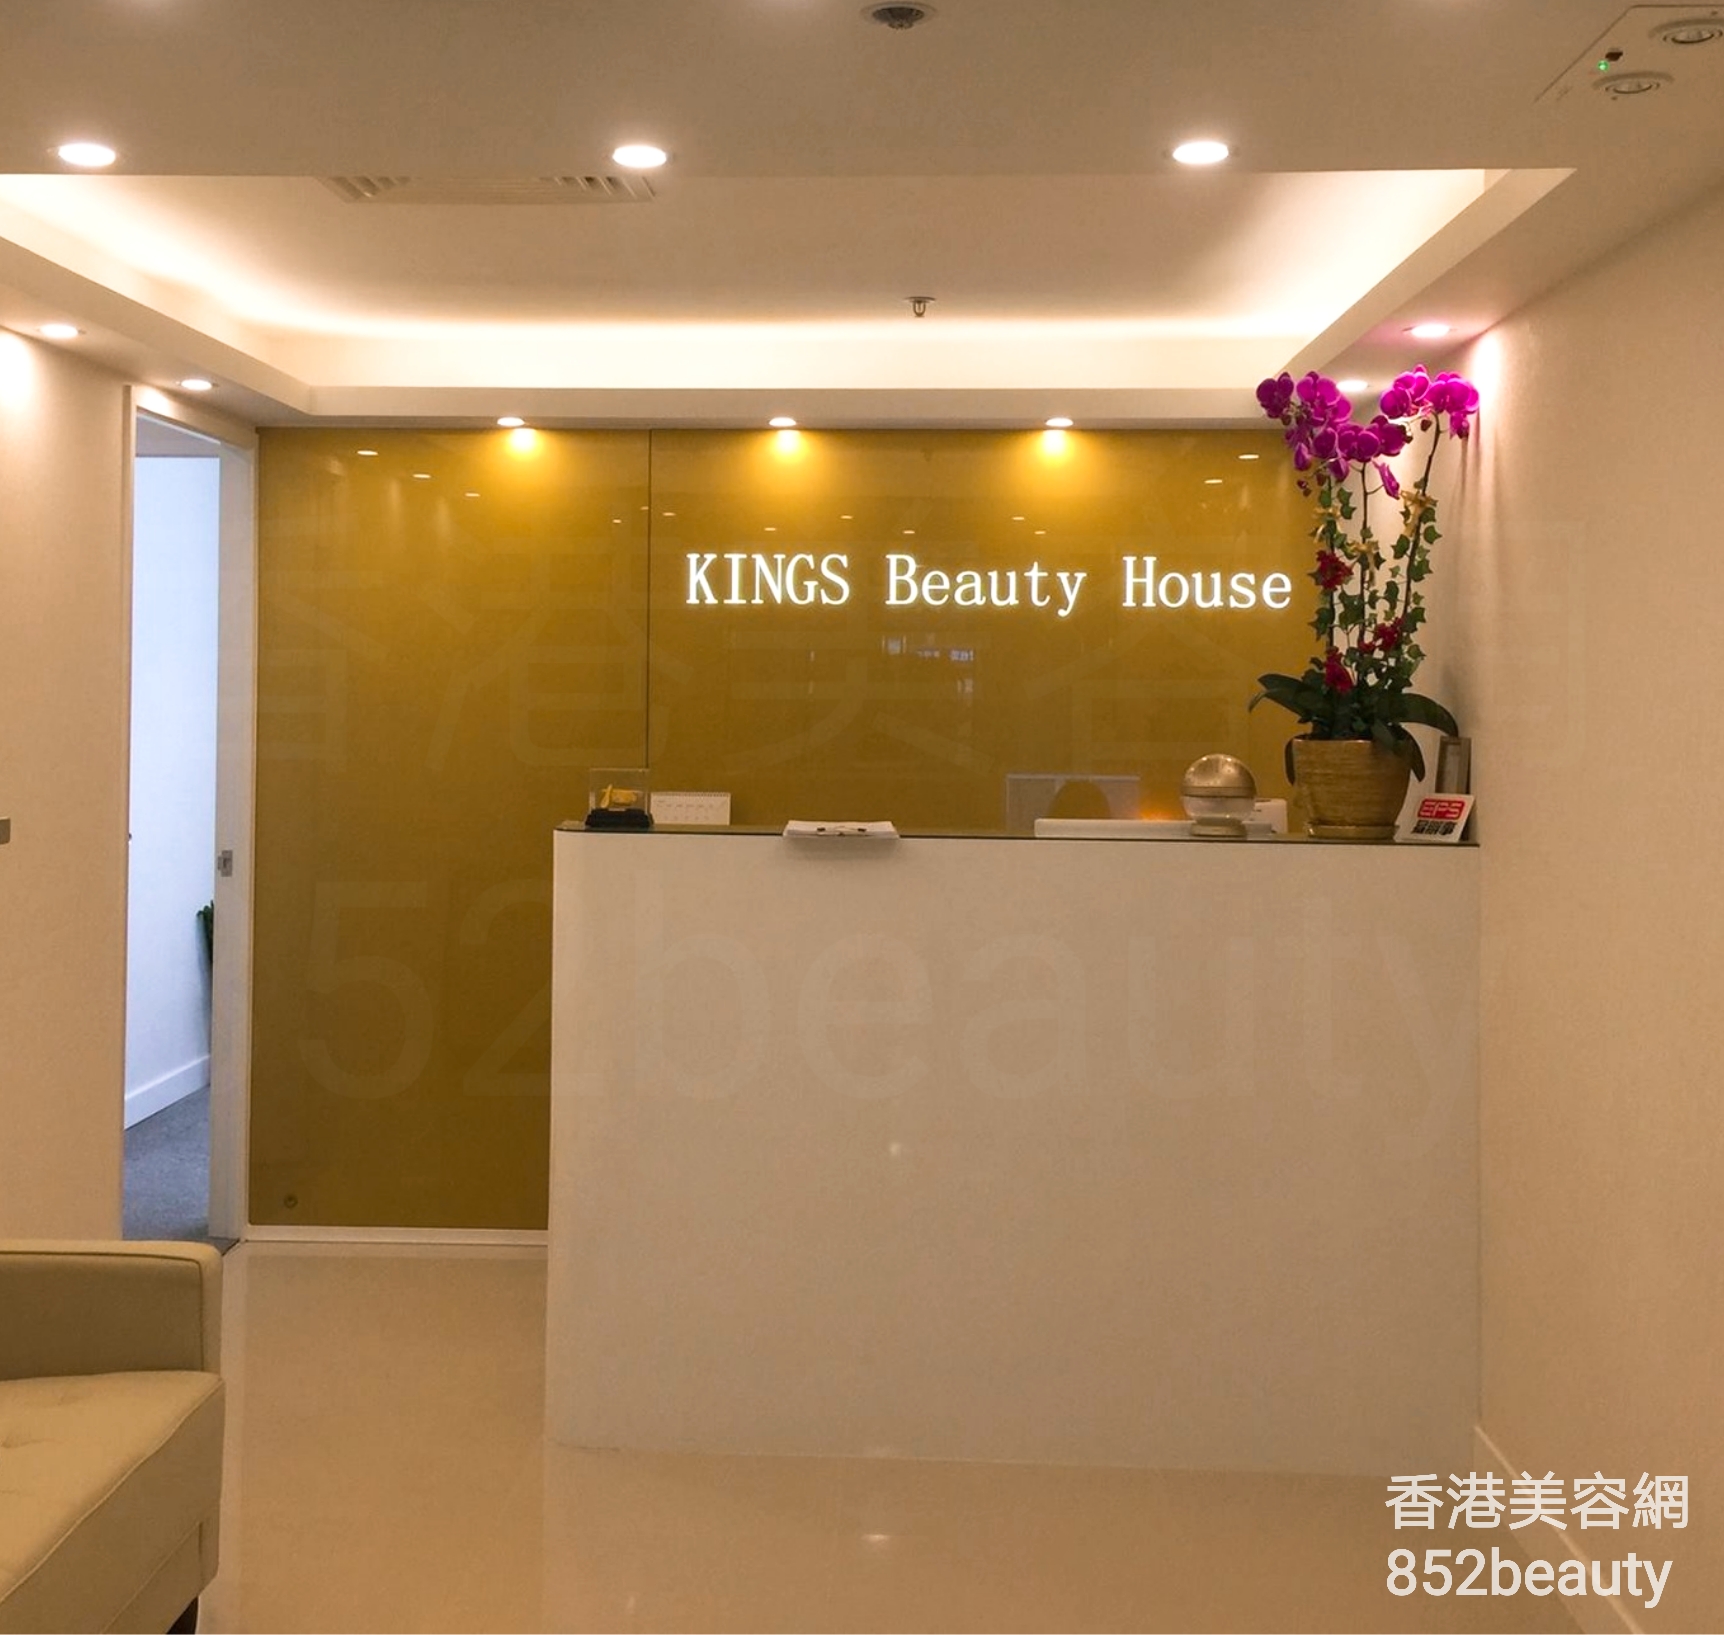 Hand and foot care: KINGS Beauty House (雅蘭中心 本店)